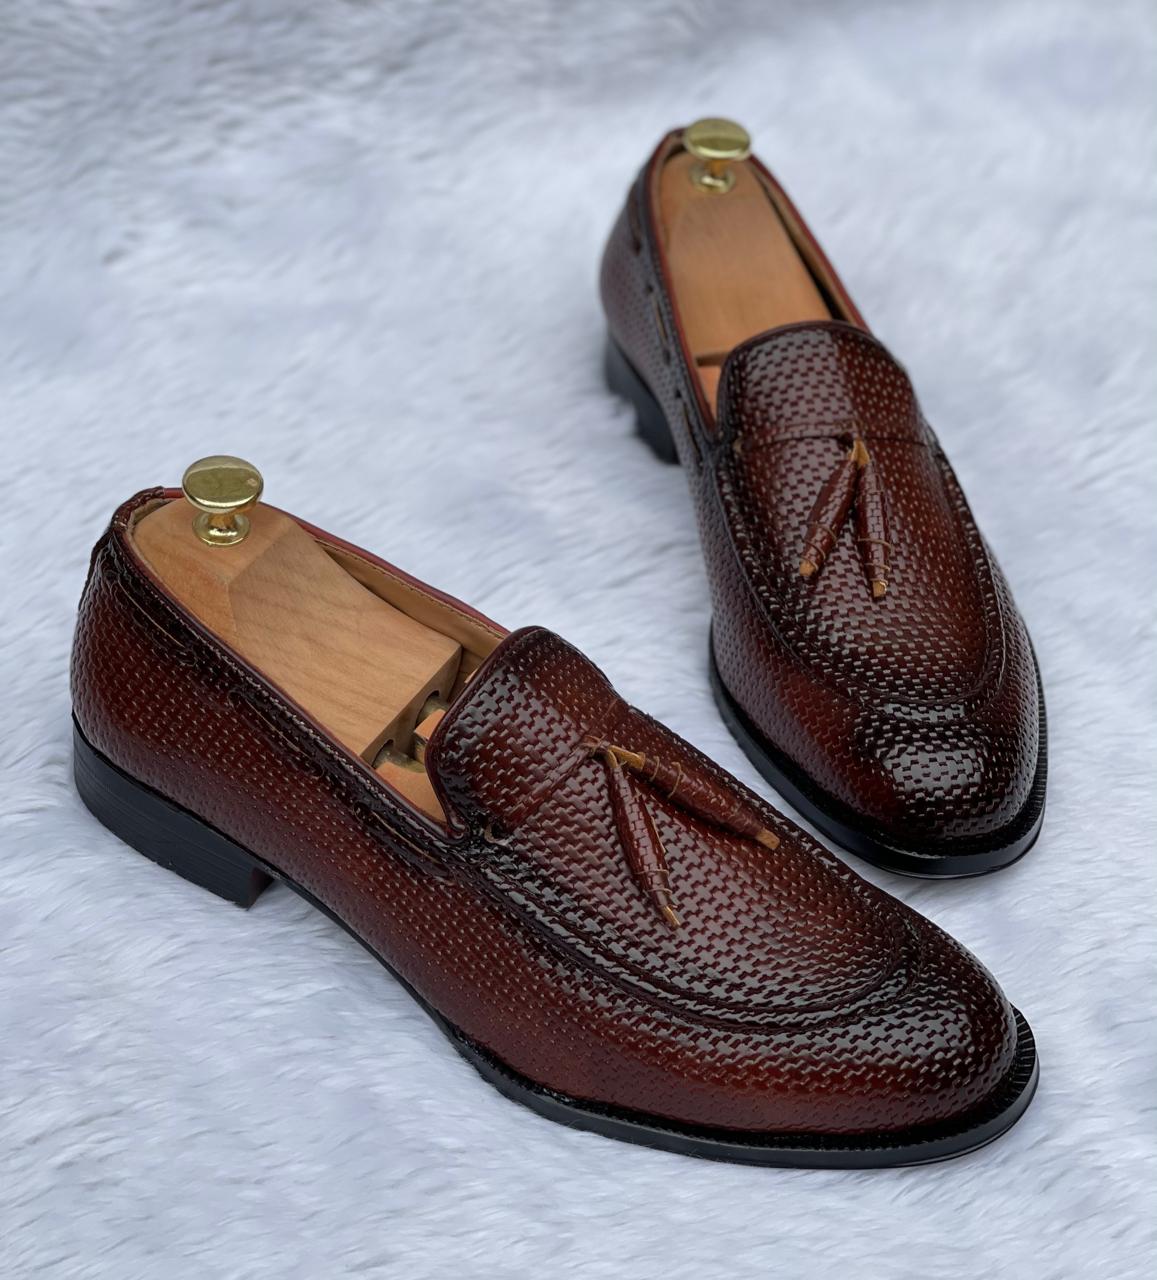 New Classy Moccasin Loafer For Office Wear And Casual Wear-Unique and Classy